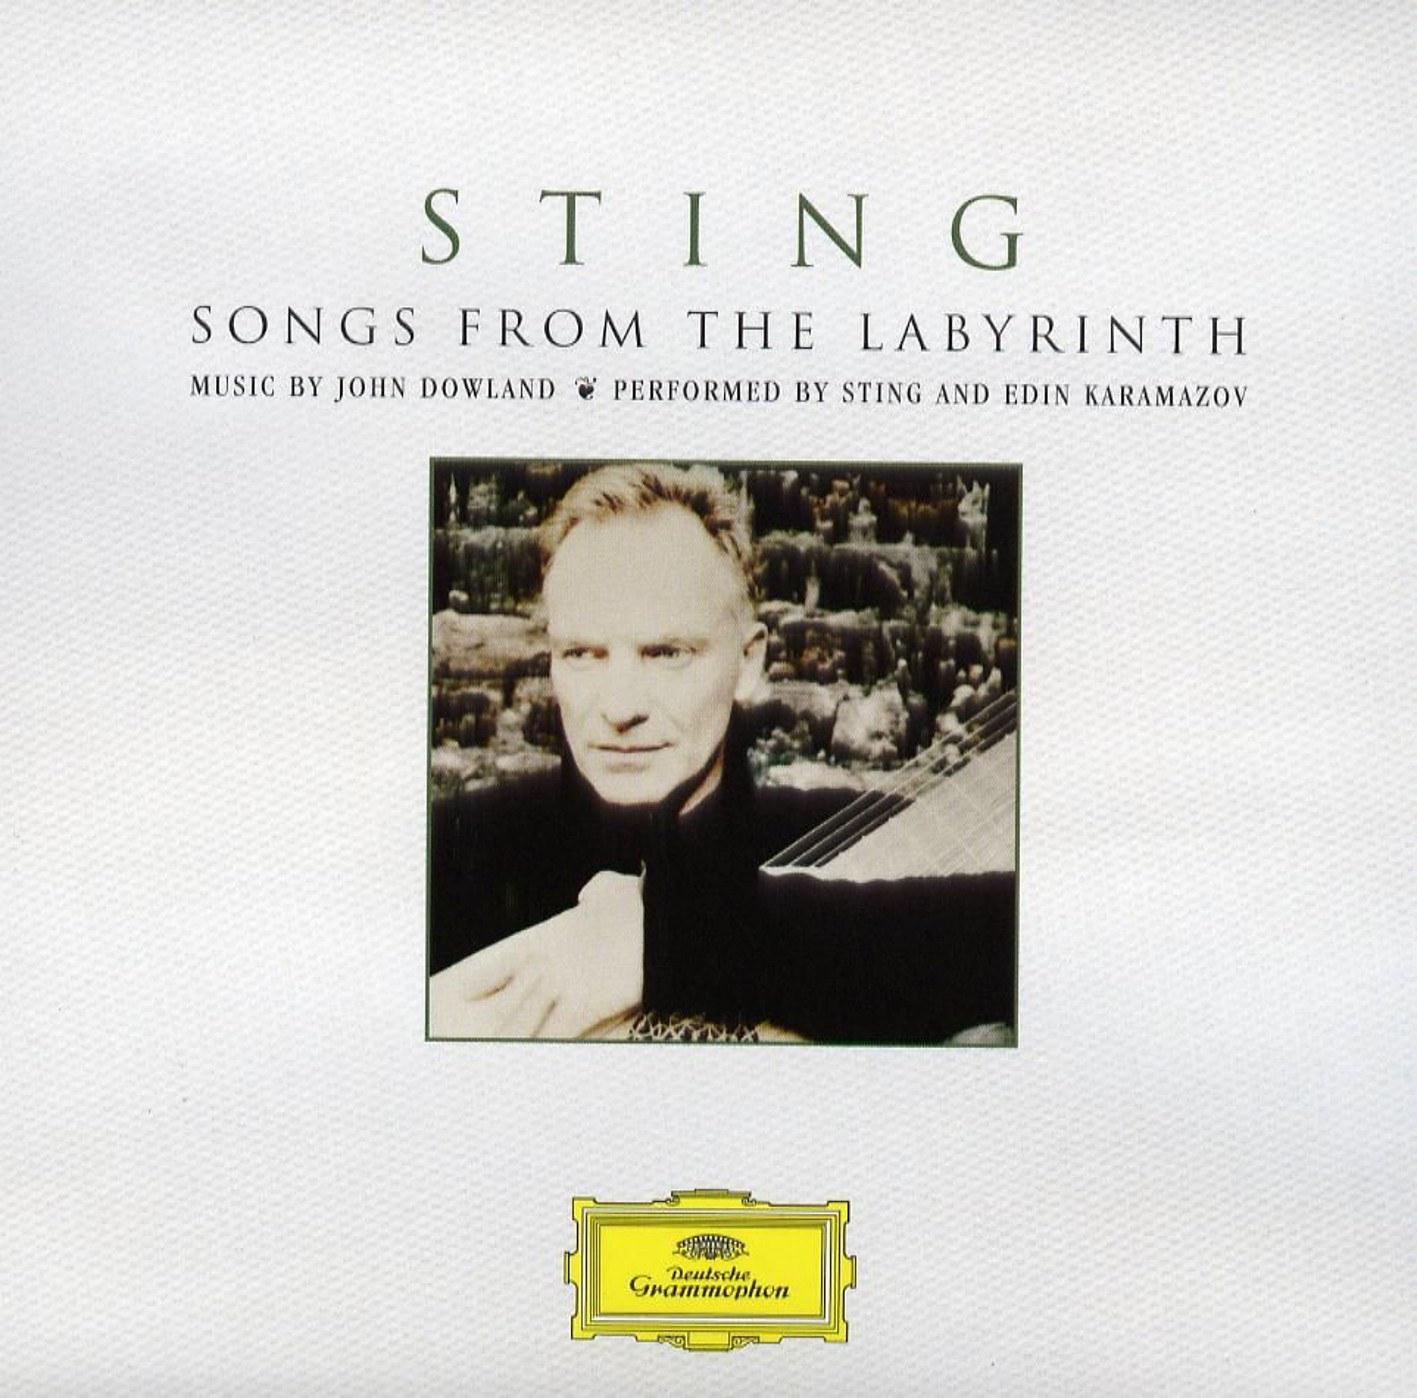 [Sting+Songs+From+The+Labyrinth--f.jpg]